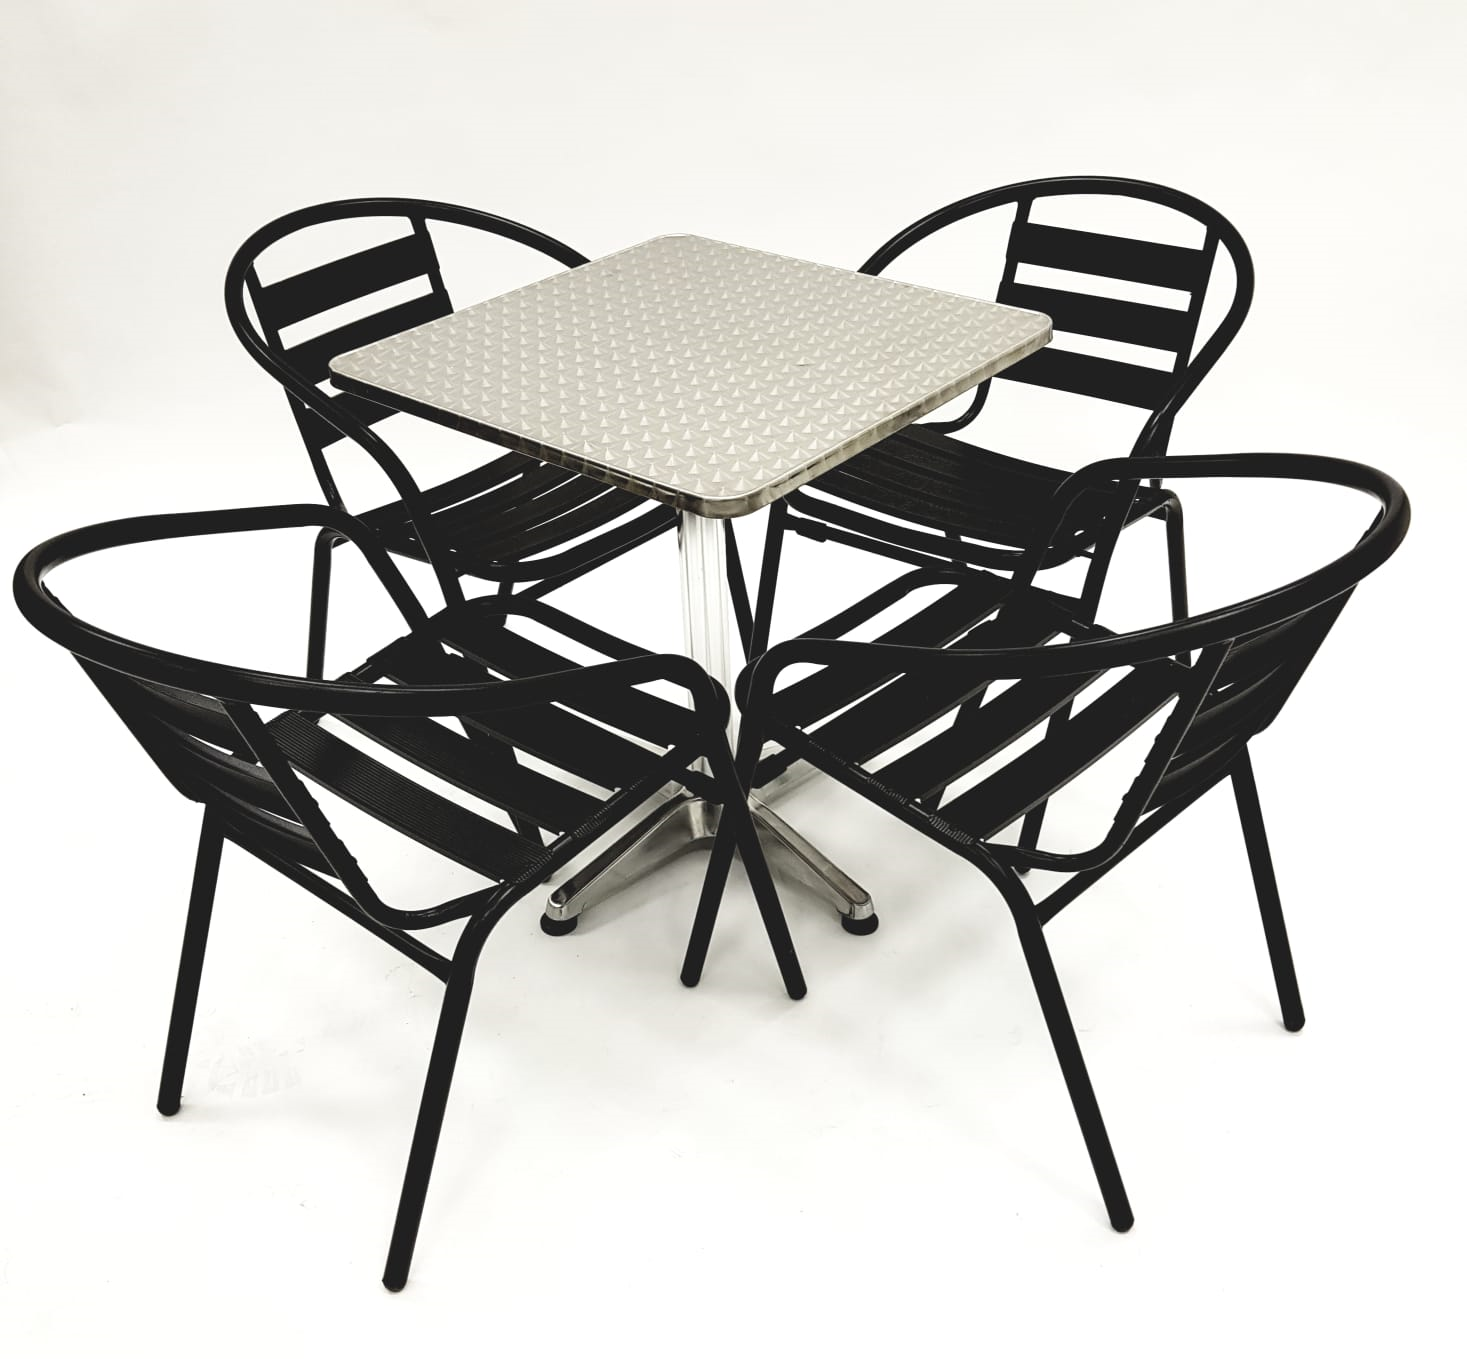 Black Steel Garden Sets with Aluminium Table - BE Furniture Sales